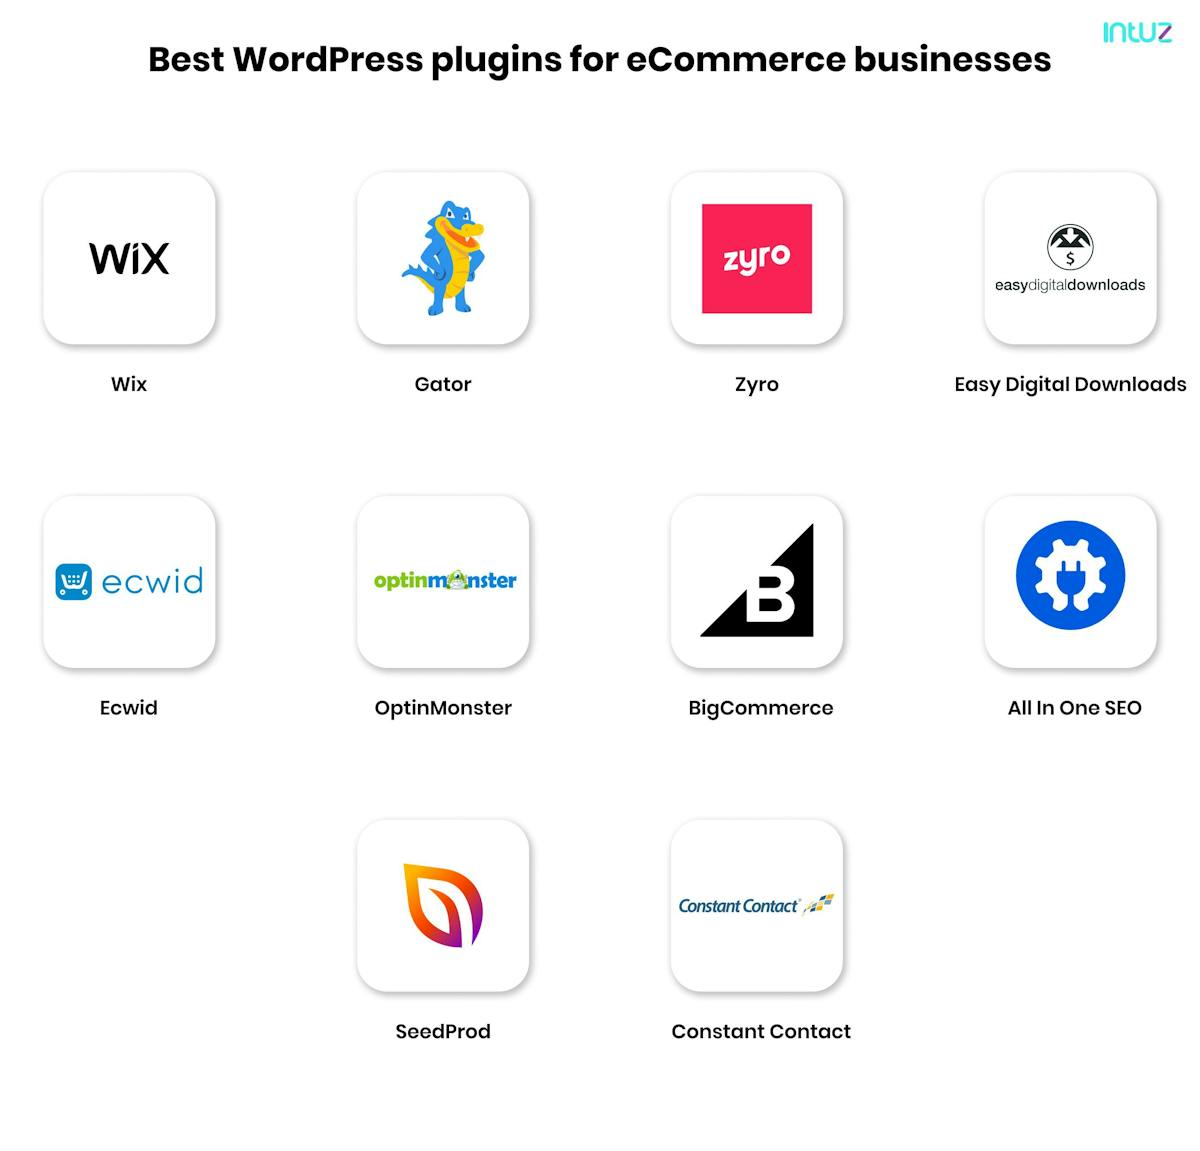 wordpress plugins for eCommerce businesses  